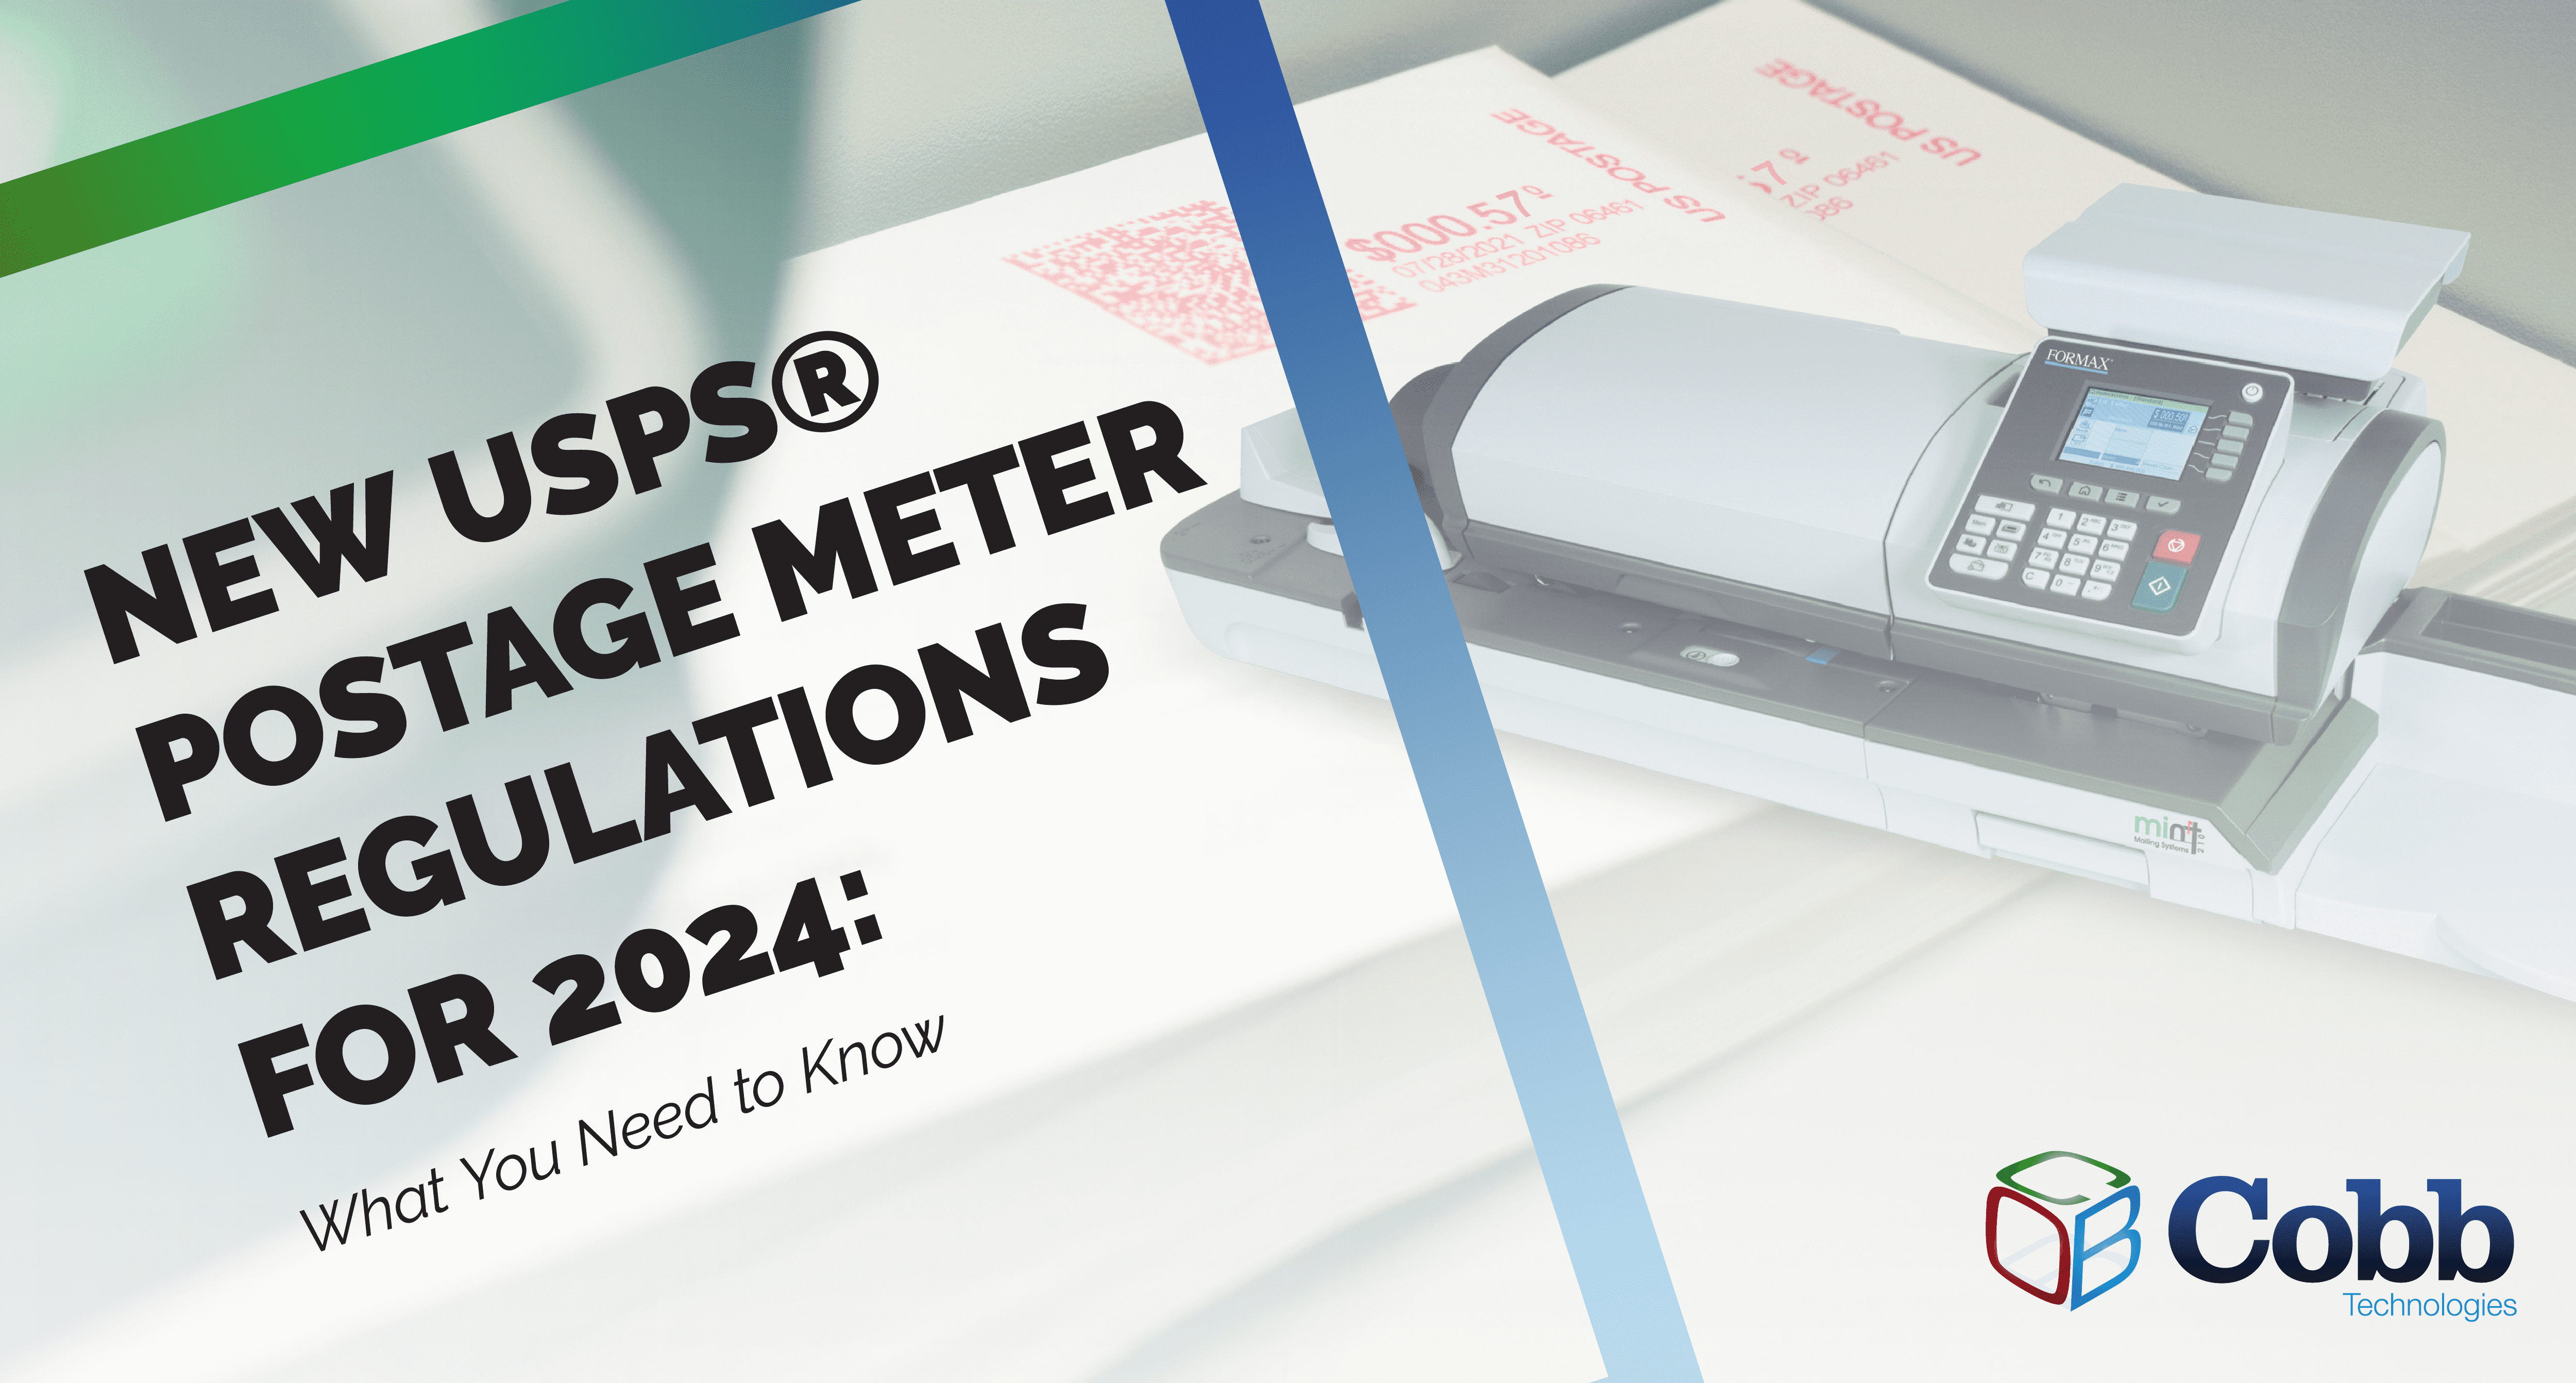 New USPS Postage Meter Regulations for 2024: What You Need to Know